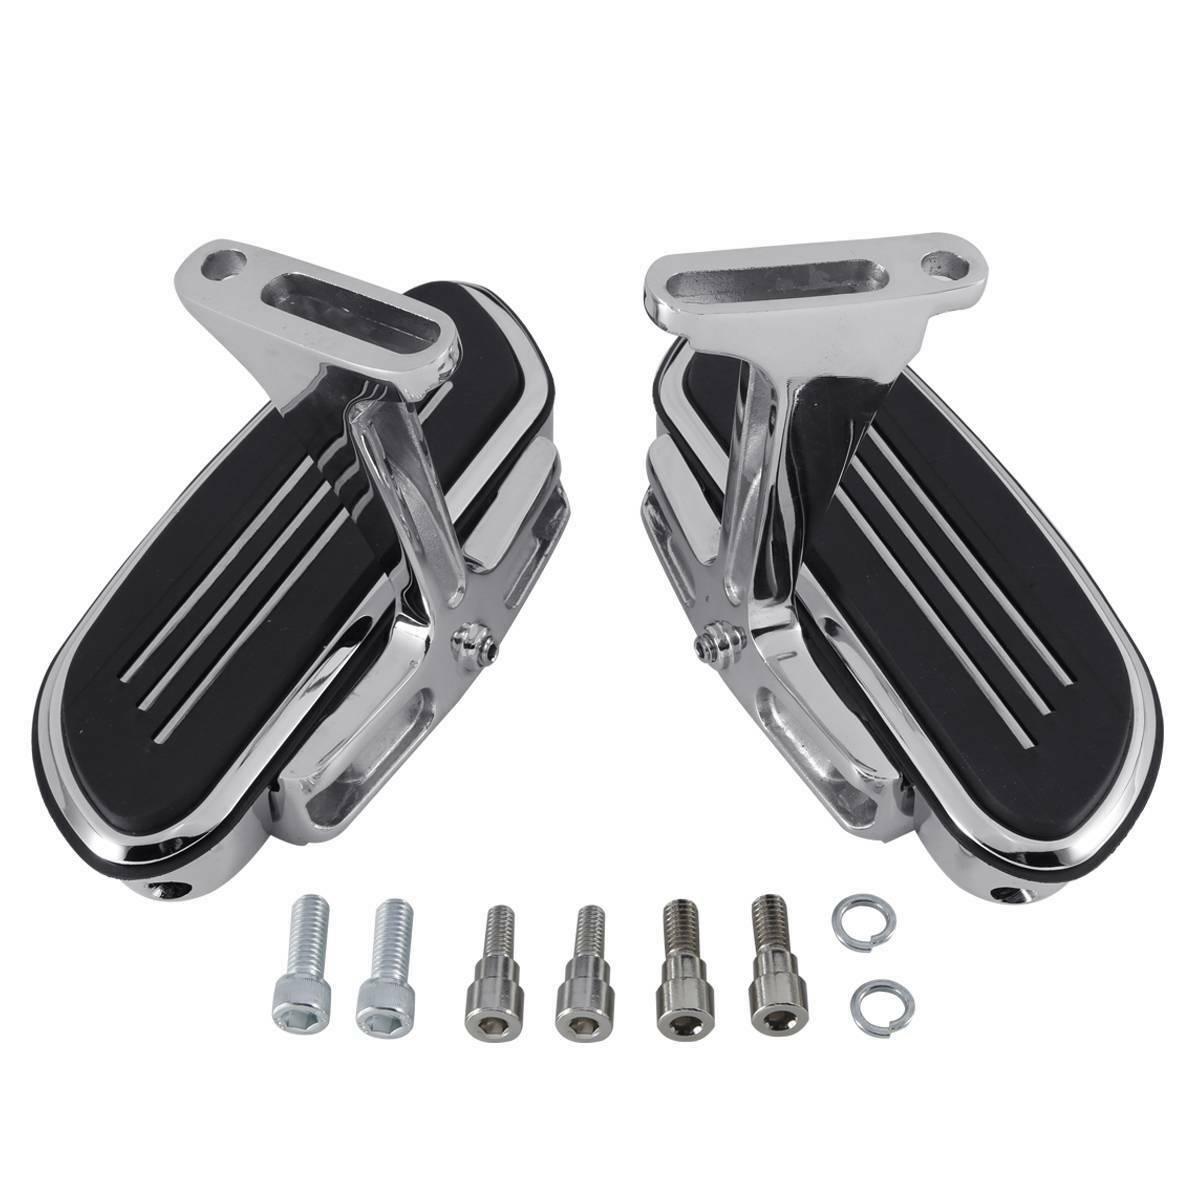 Pegstreamliner Passenger Foot Floor board For Harley Touring Street Glide 93-Up - Moto Life Products